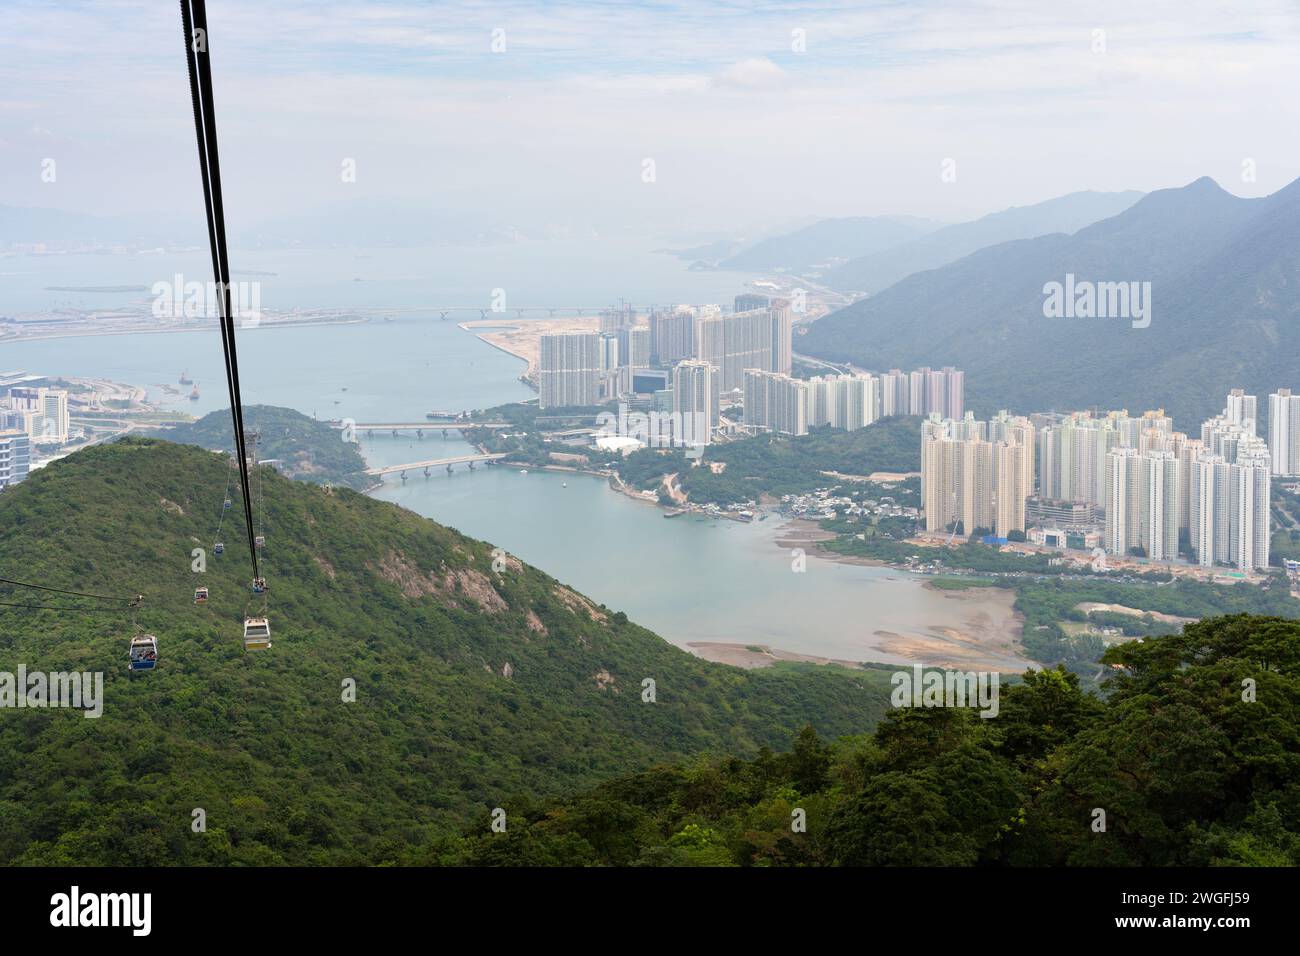 Mountain side view with city in background and gondola ride Stock Photo